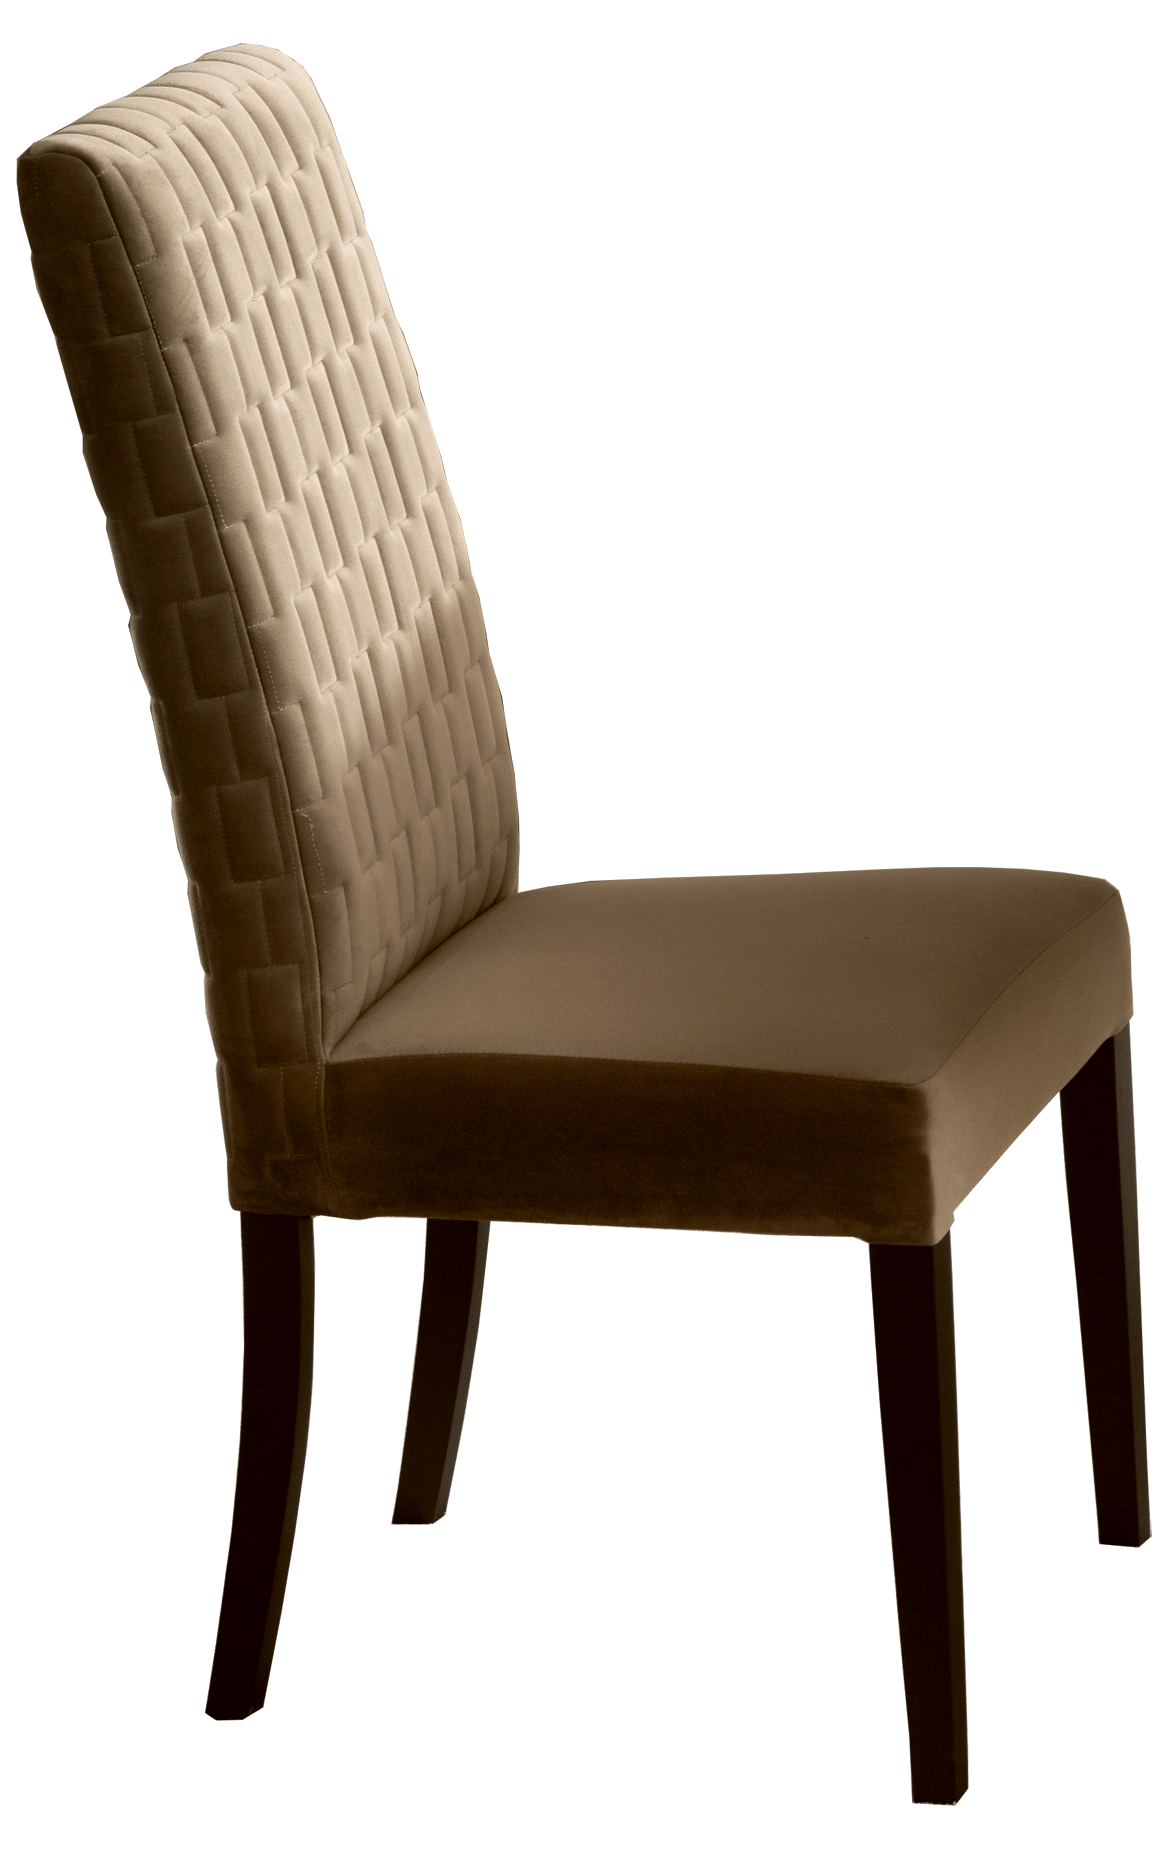 Dining Room Furniture Tables Poesia Dining Chair by Arredoclassic